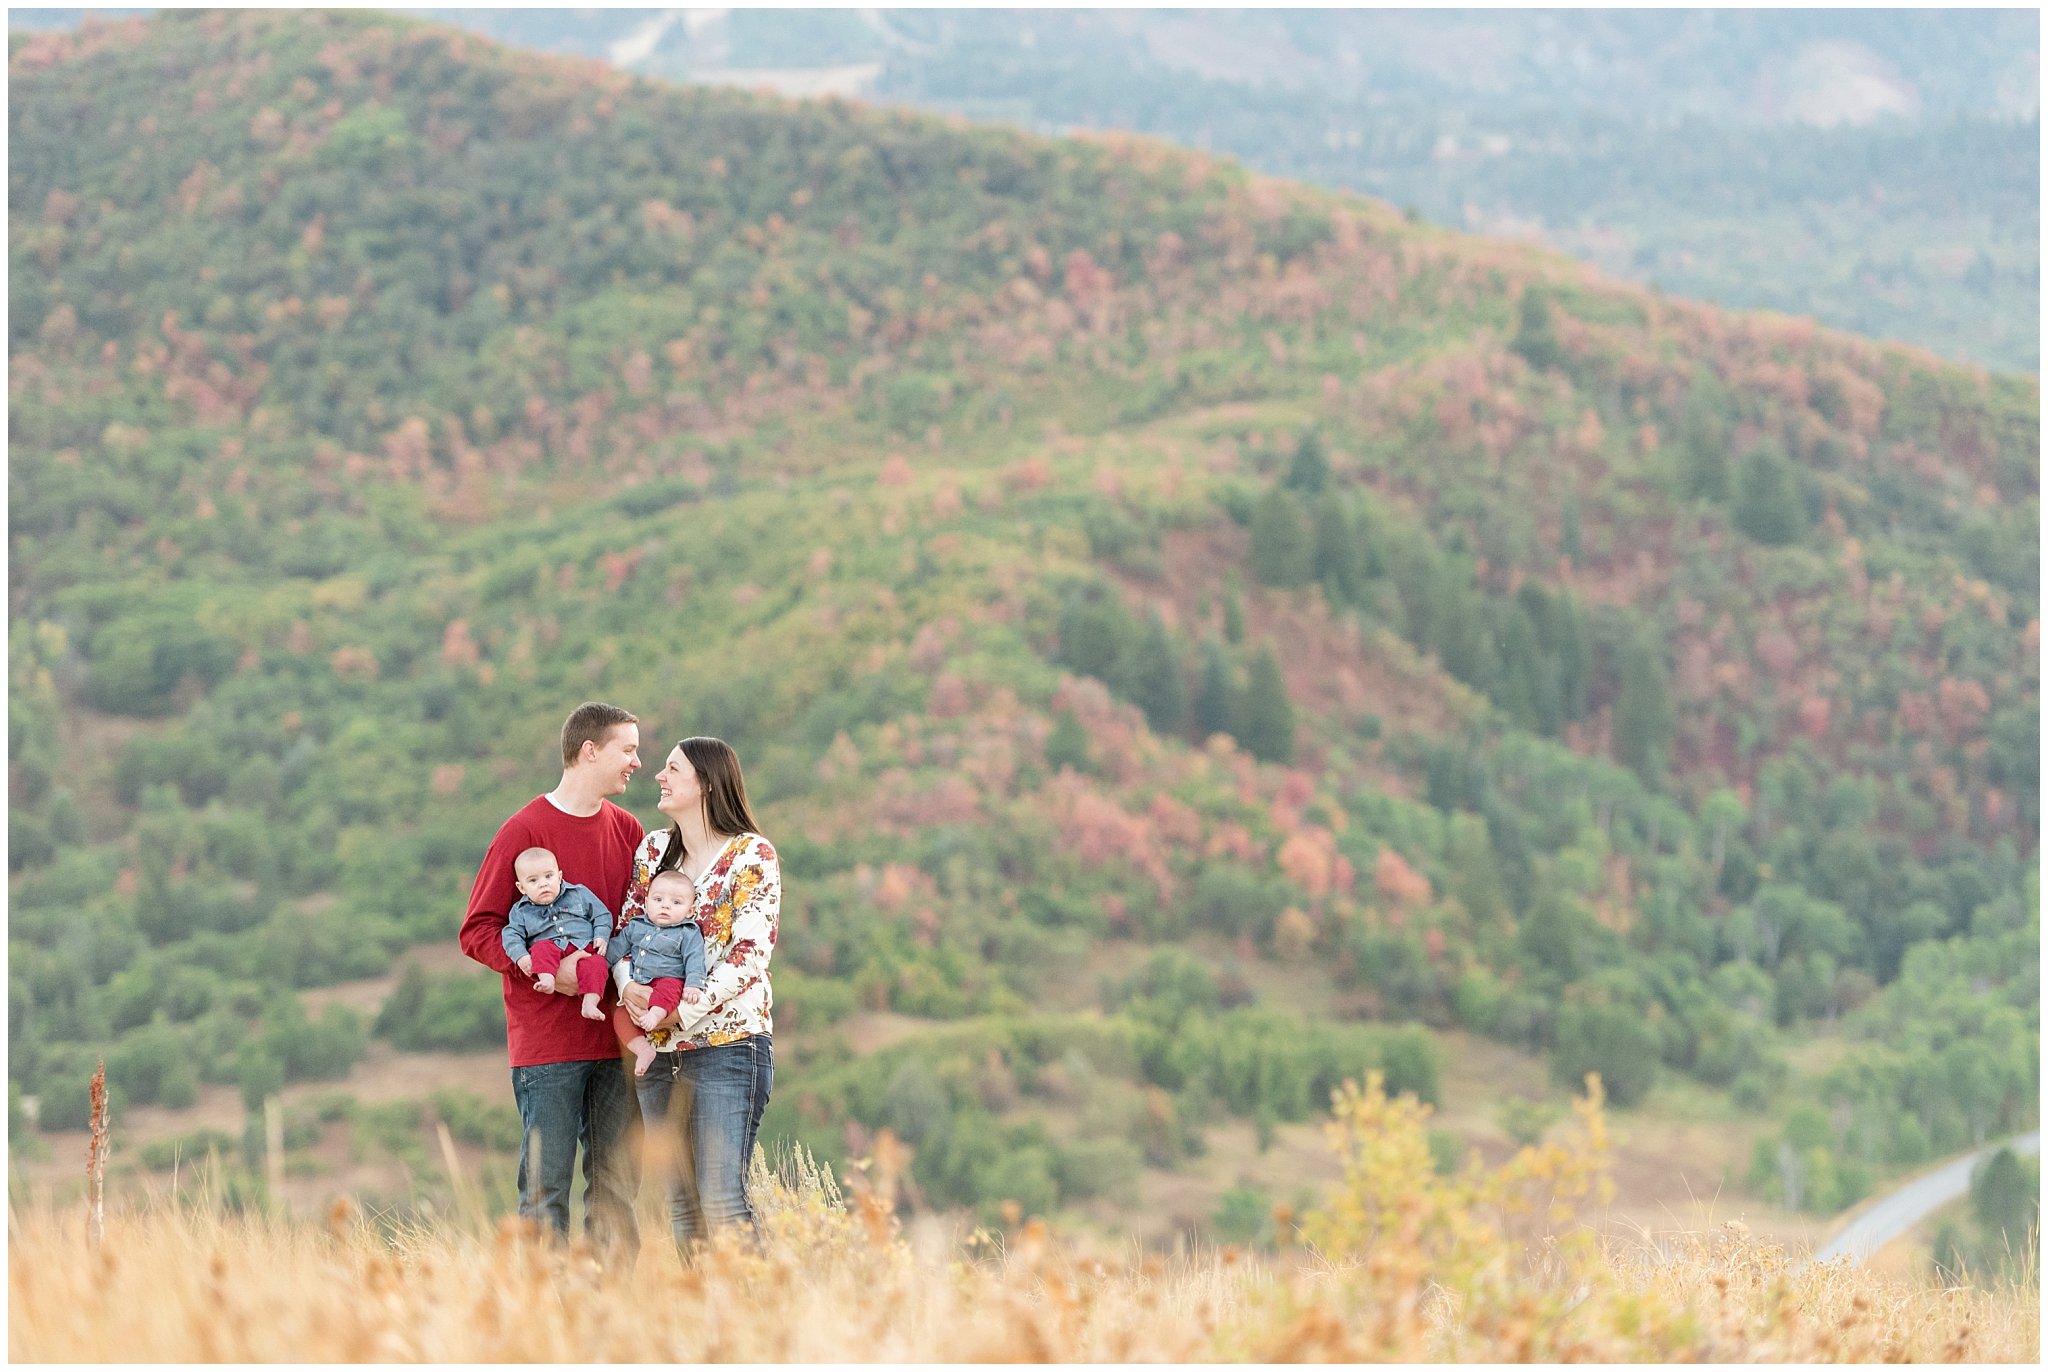 Fall family pictures in the mountains with colored leaves | Fall Family Pictures at Snowbasin | Jessie and Dallin Photography